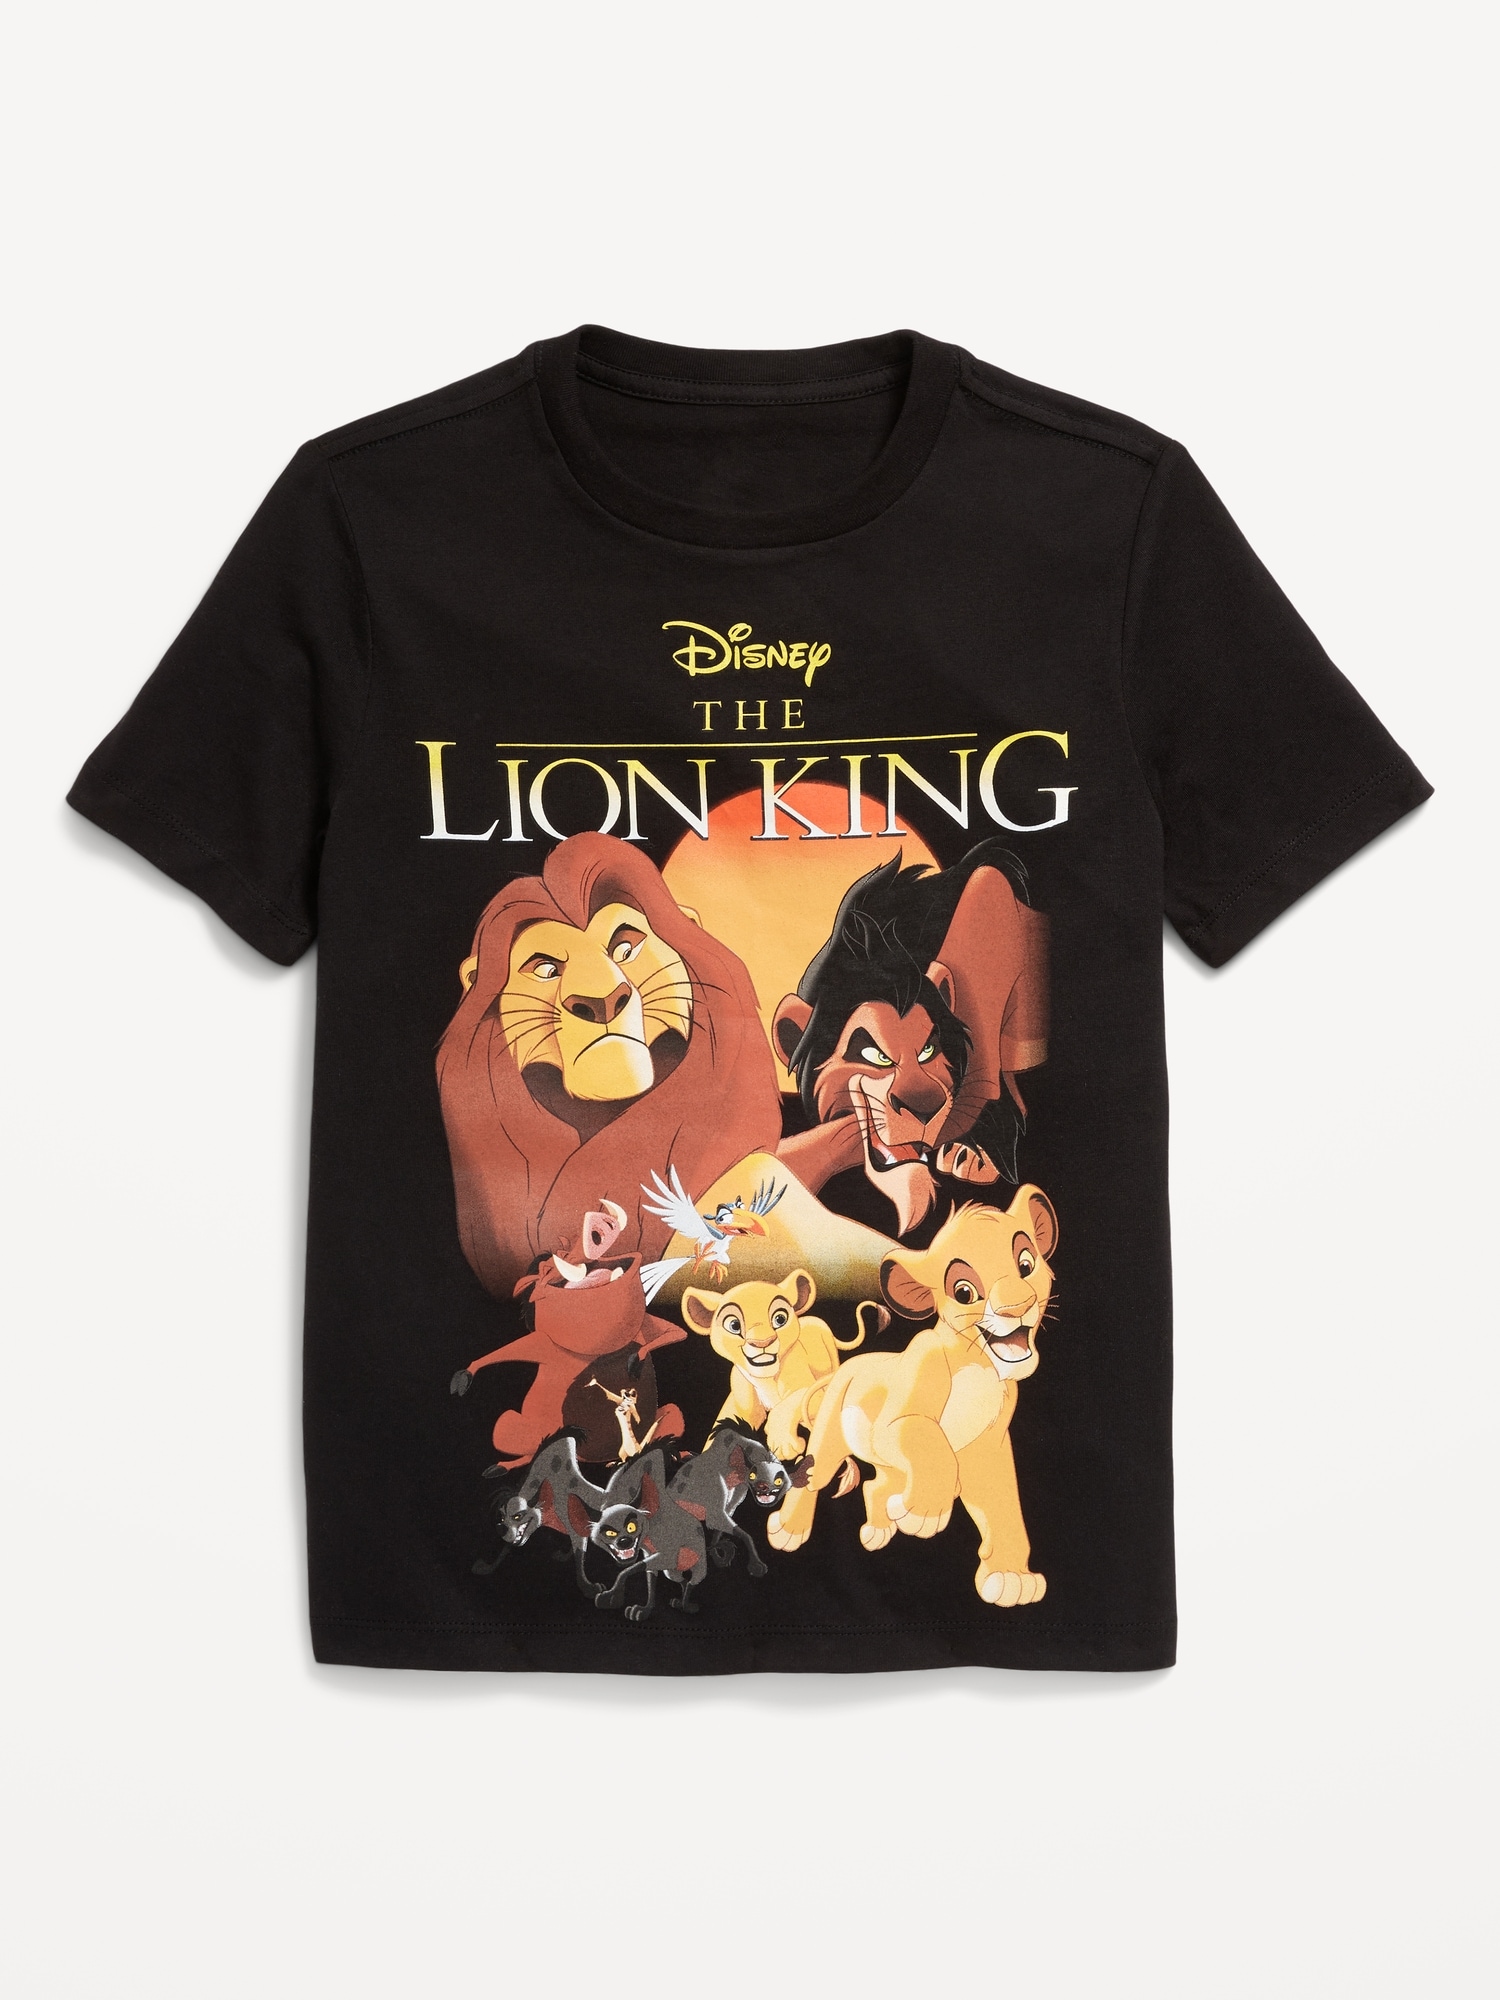 Disney© The Lion King Gender-Neutral Graphic T-Shirt for Kids